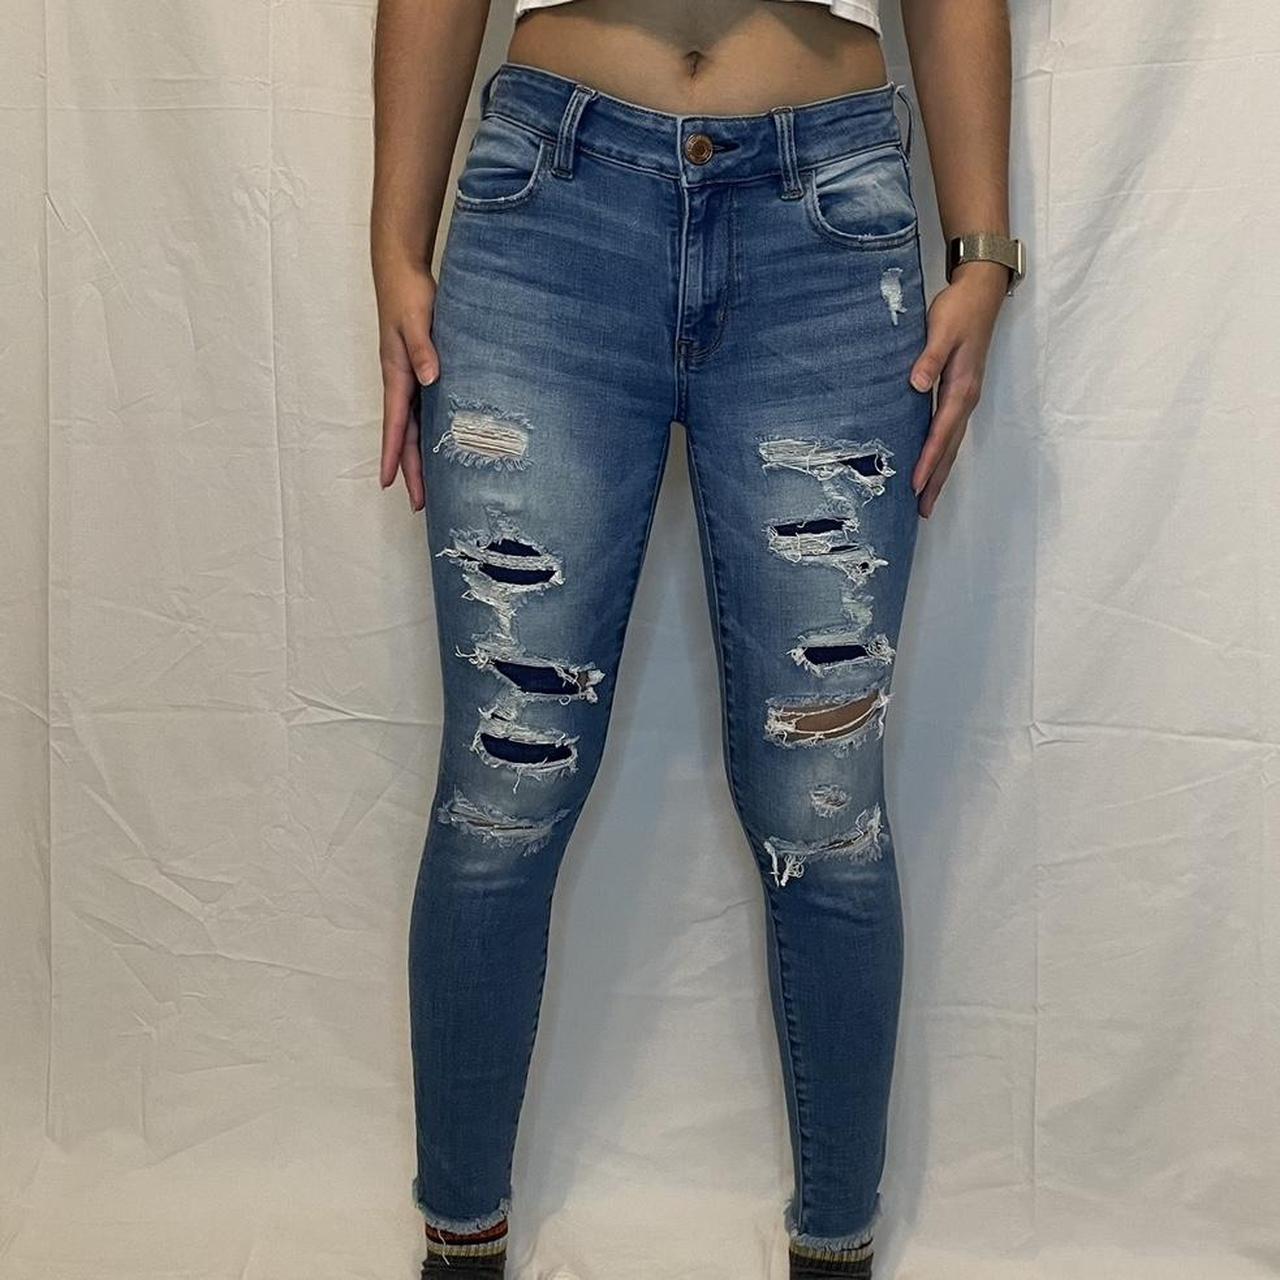 American Eagle gray ripped jeans - Depop